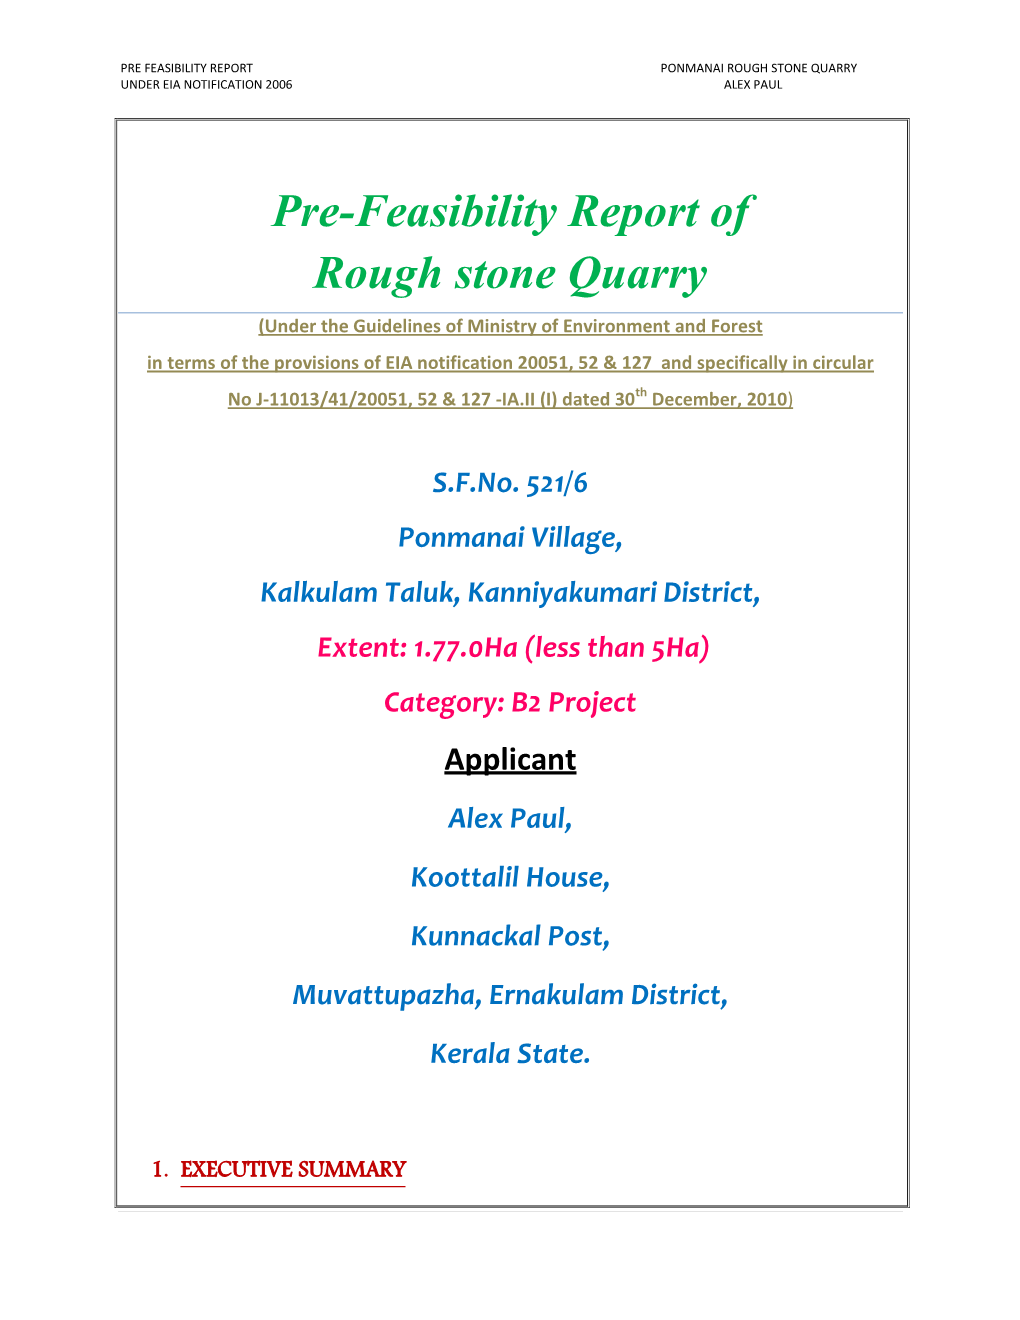 Pre-Feasibility Report of Rough Stone Quarry